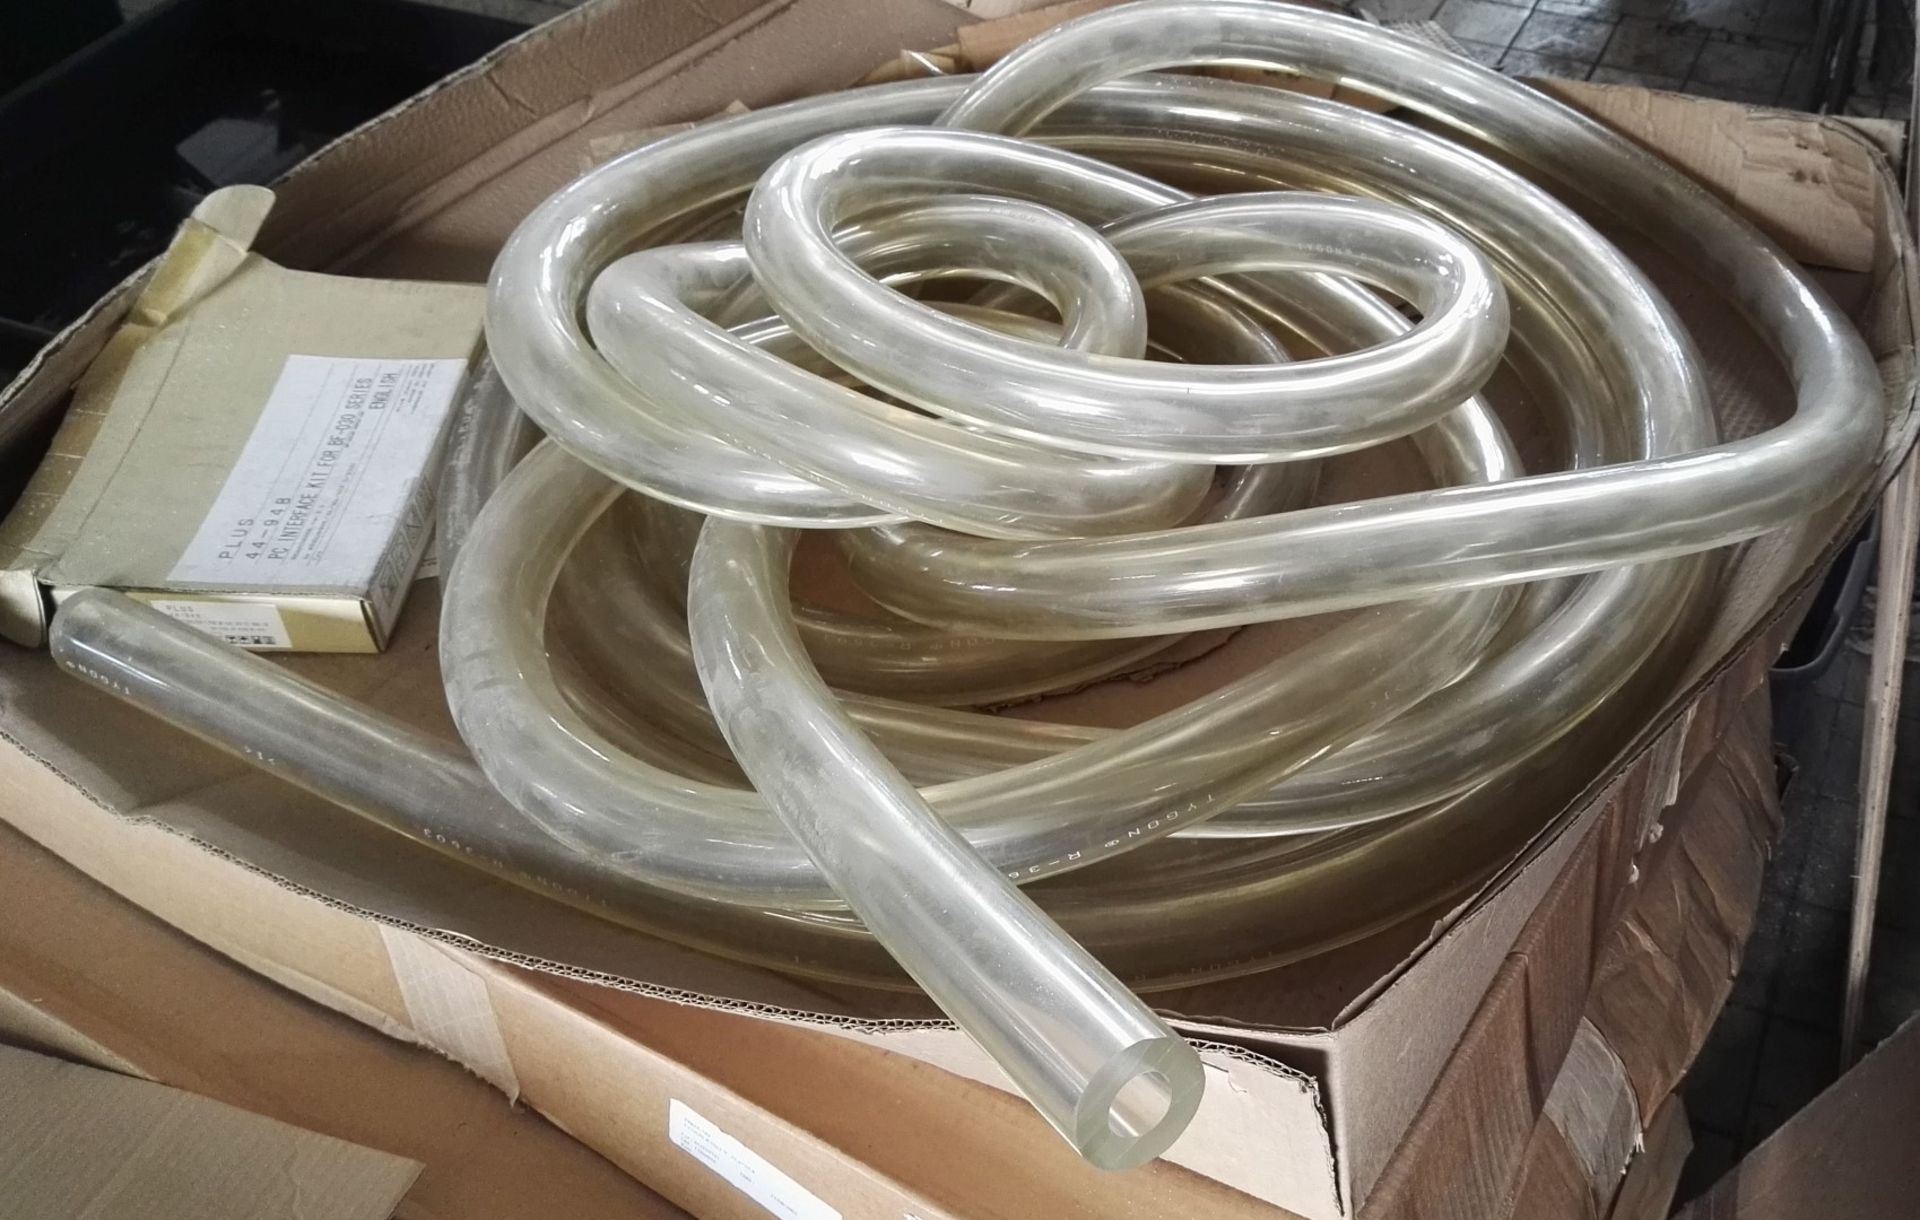 1 x Tygon 2" Wide Flexible Transparent Tubing - 50Ft Long - CL185 - Ref: R3603 - Location: Stoke- - Image 3 of 4